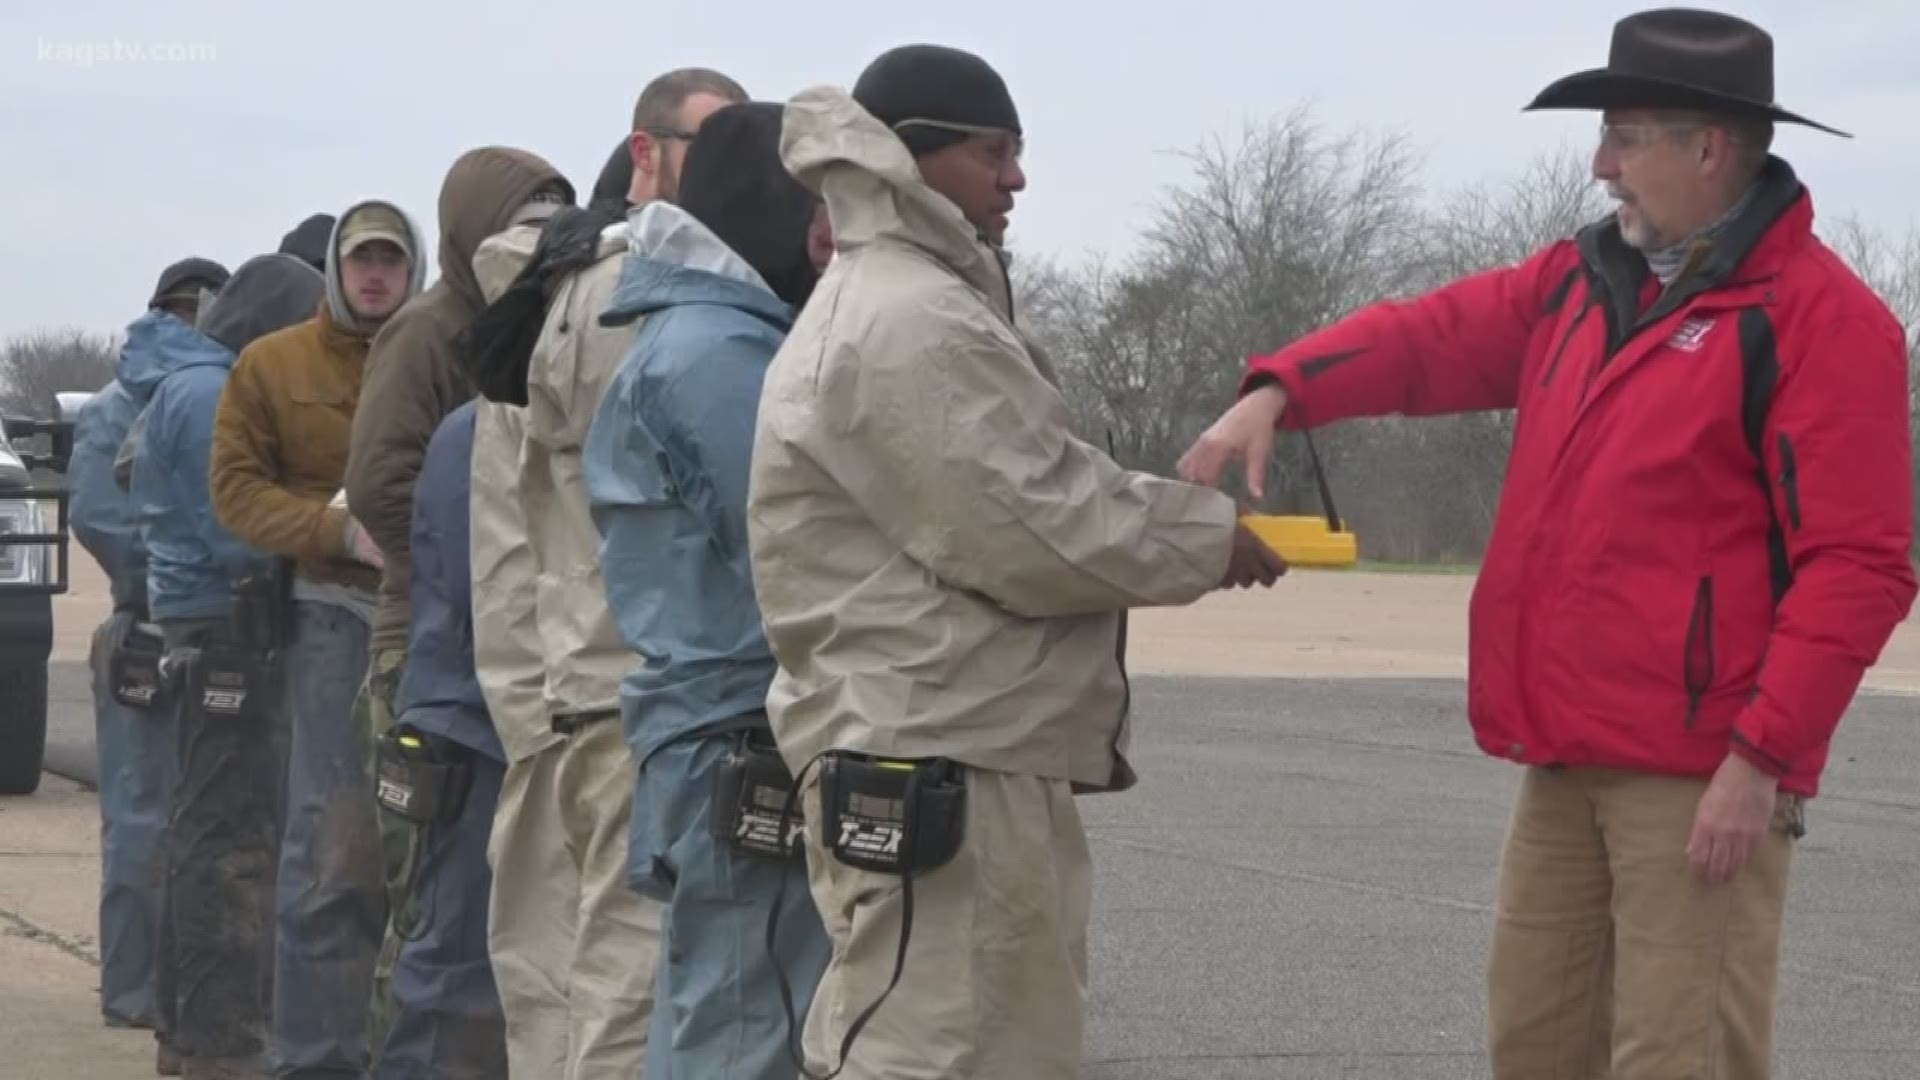 13 students set off 13 explosives in a controlled environment Thursday.